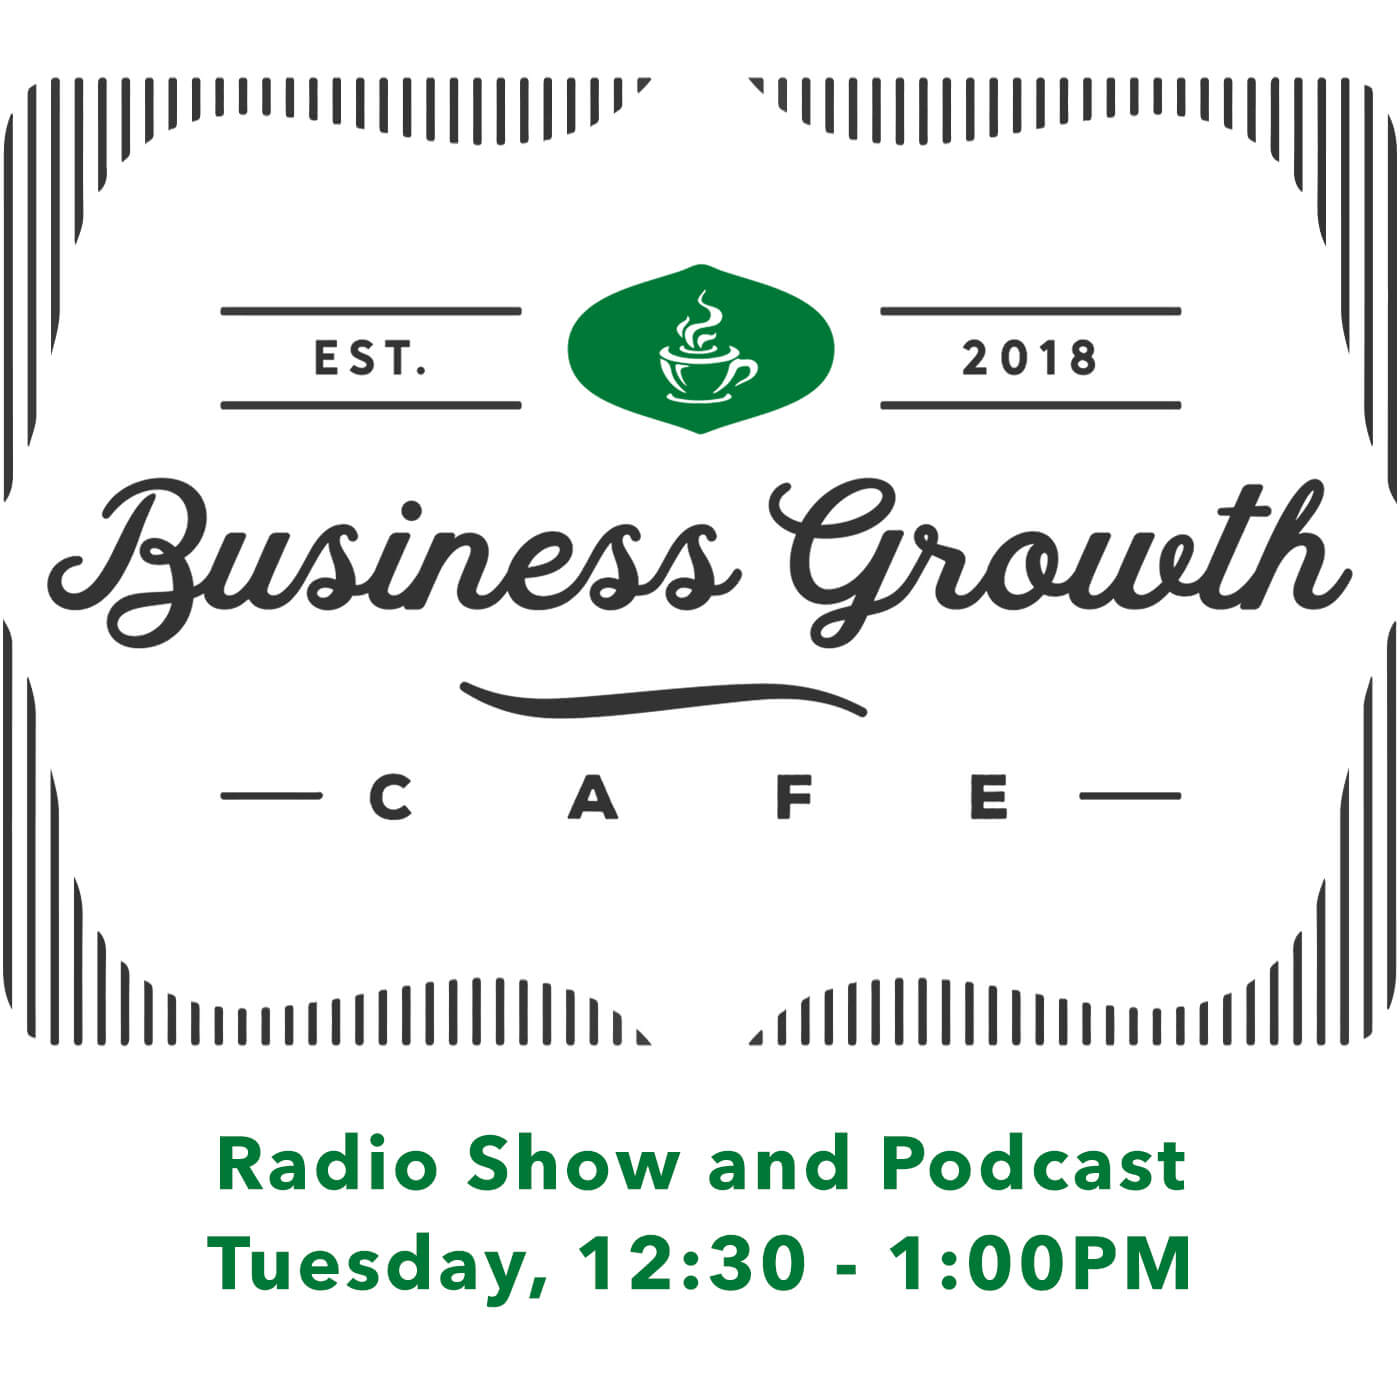 Business Growth Cafe